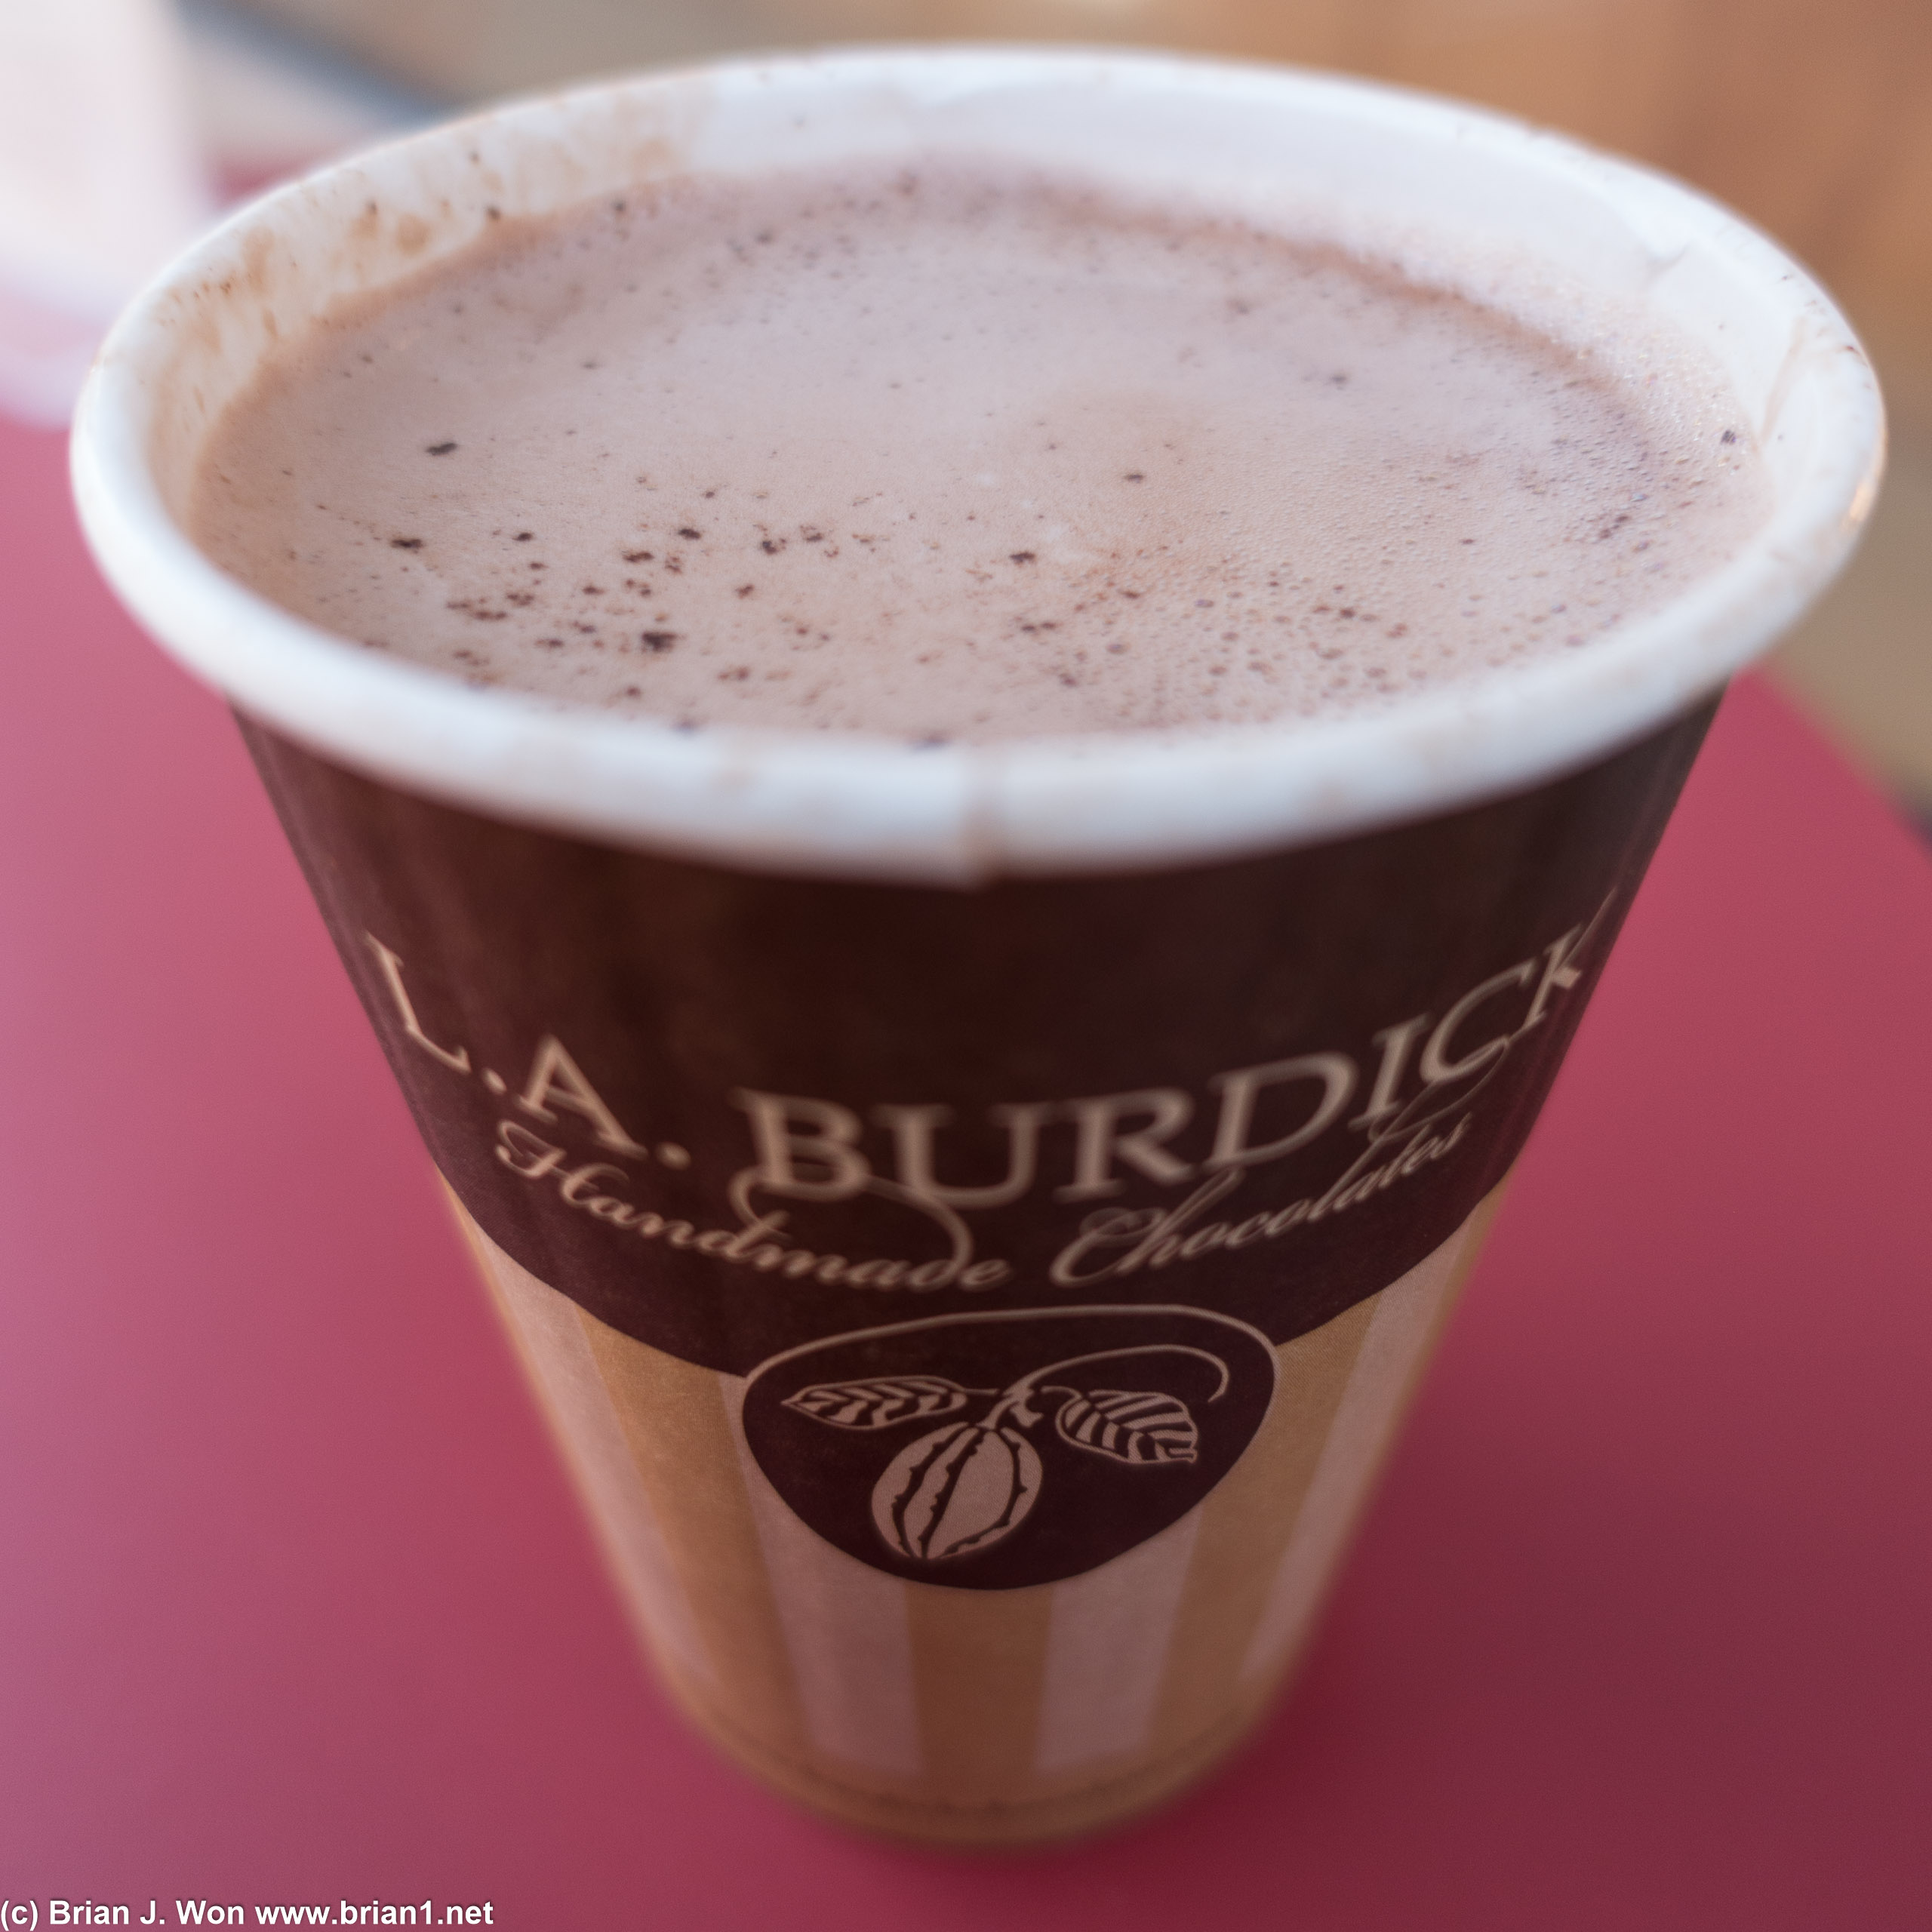 Hot chocolate at L.A. Burdick is very rich.